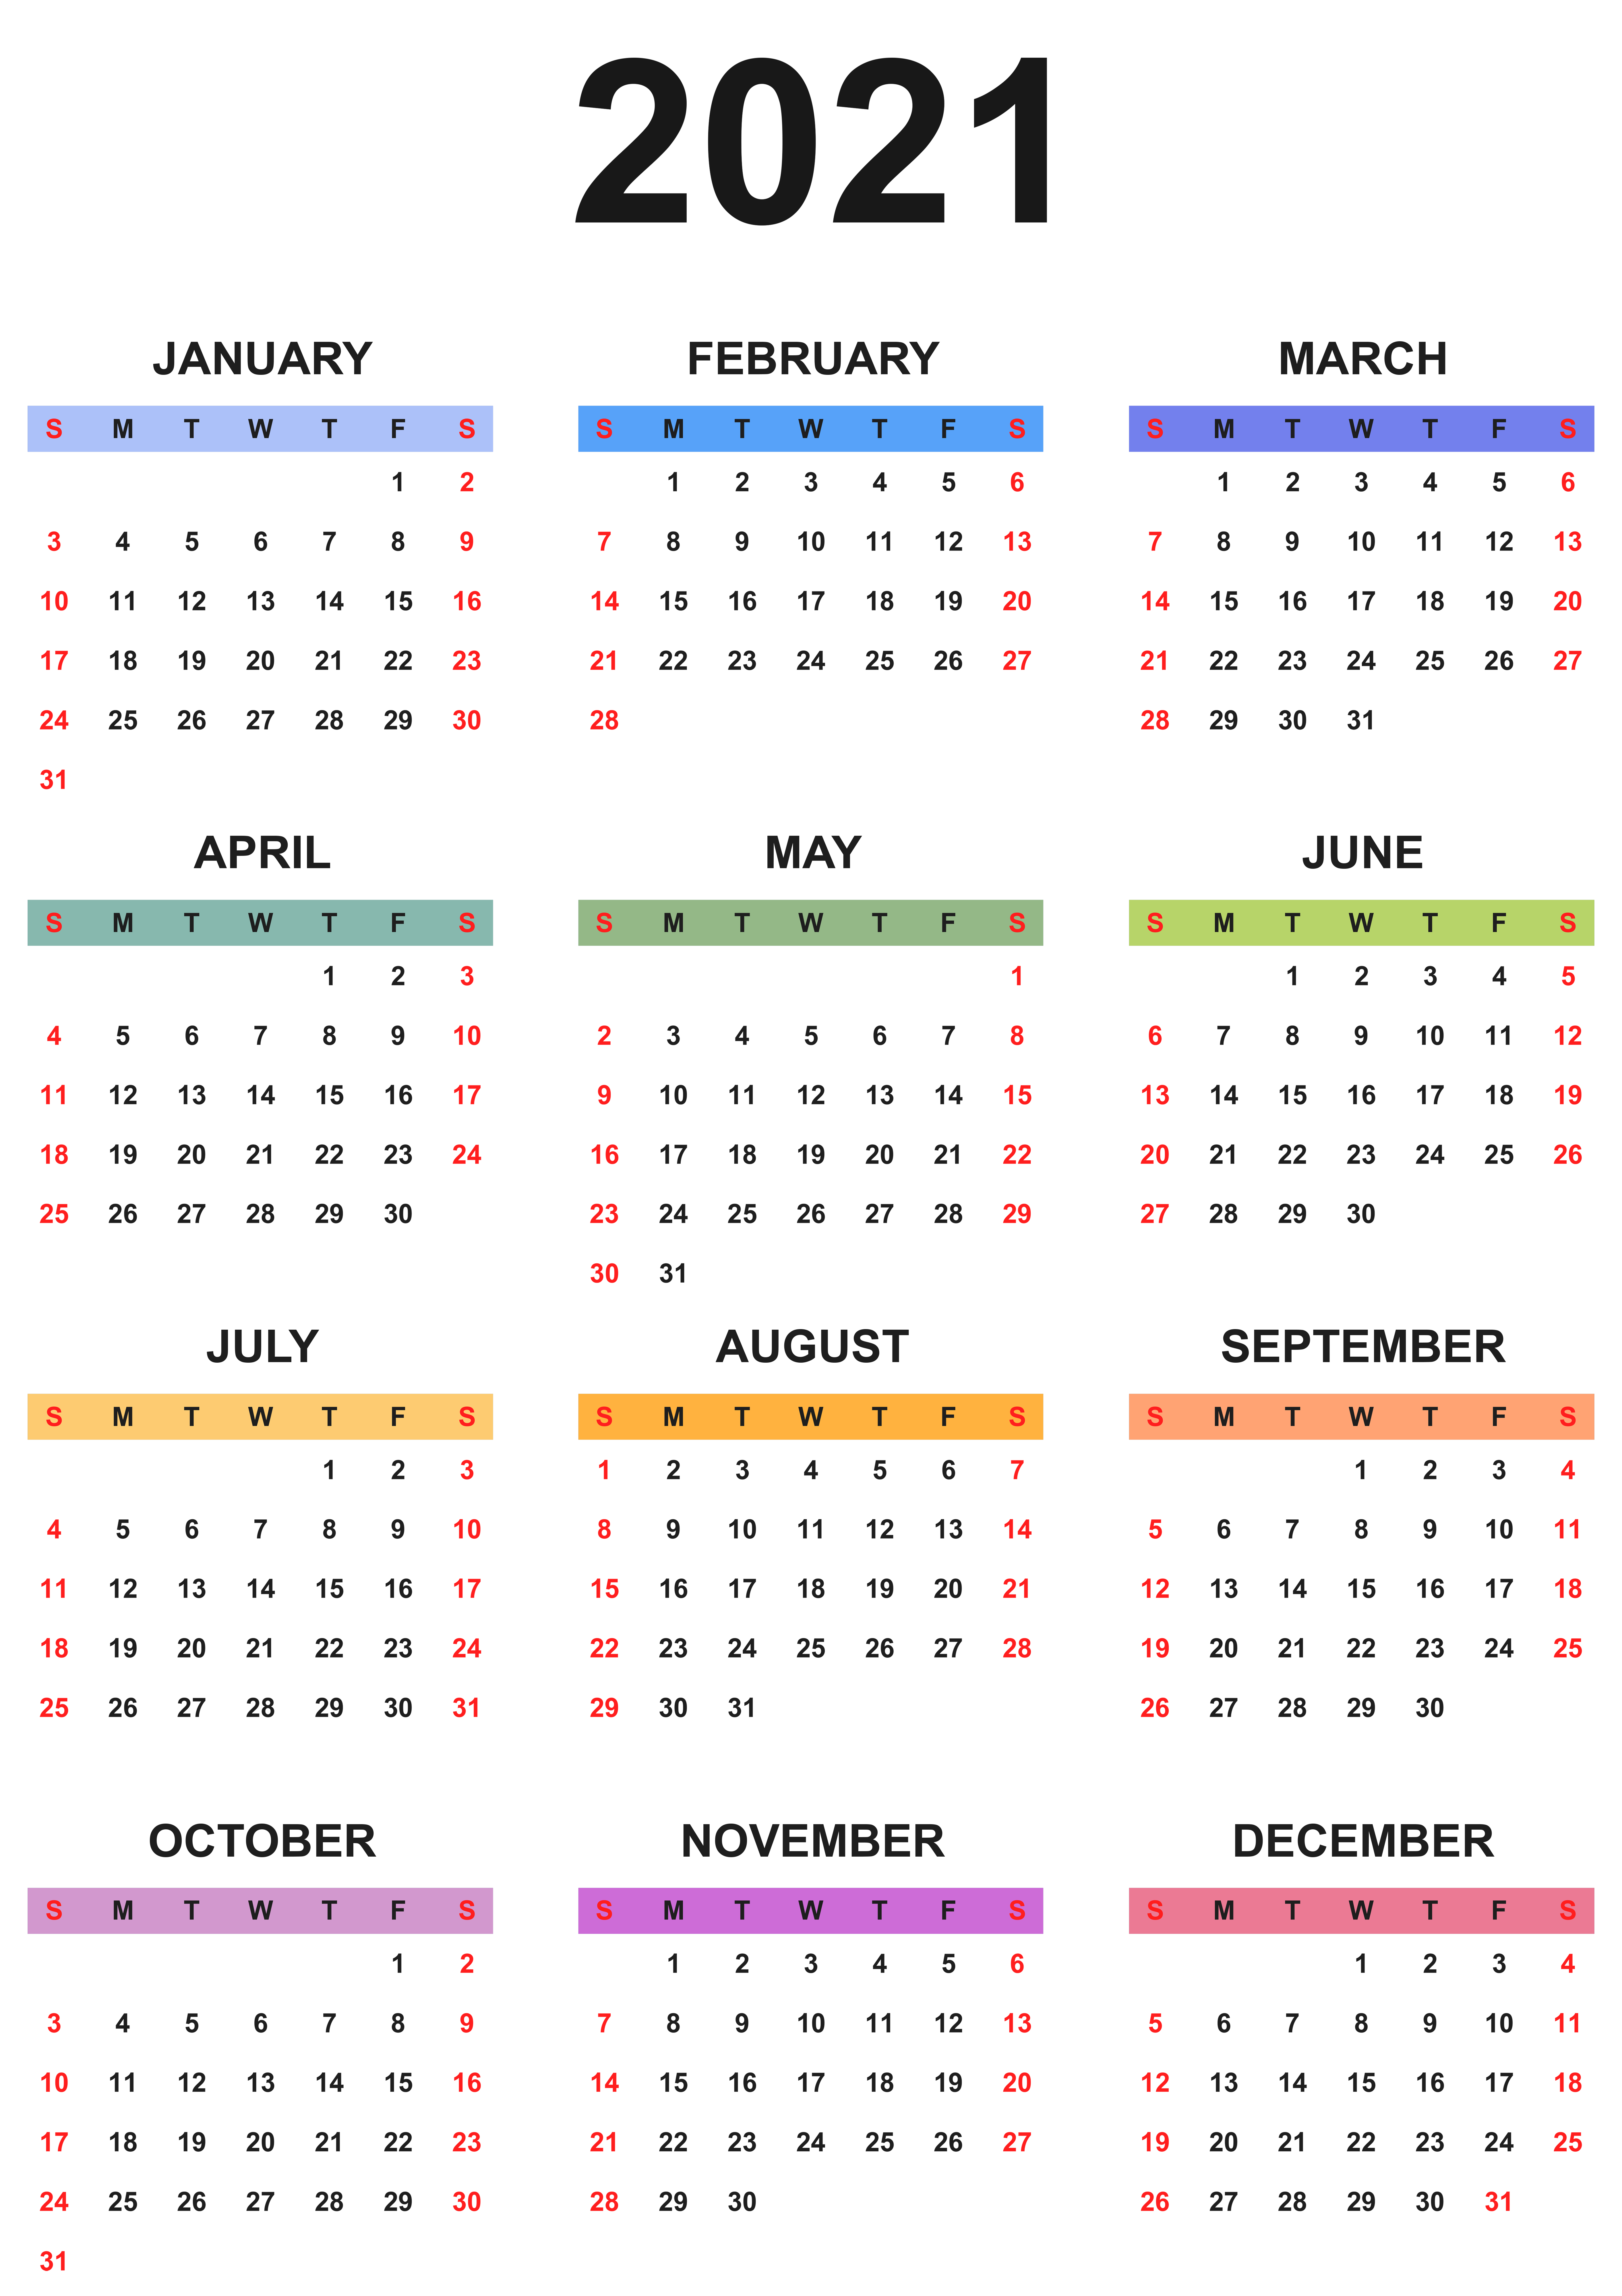 Colorful Calendar Transparent Clipart Quality Image And Transparent PNG Free Clipart